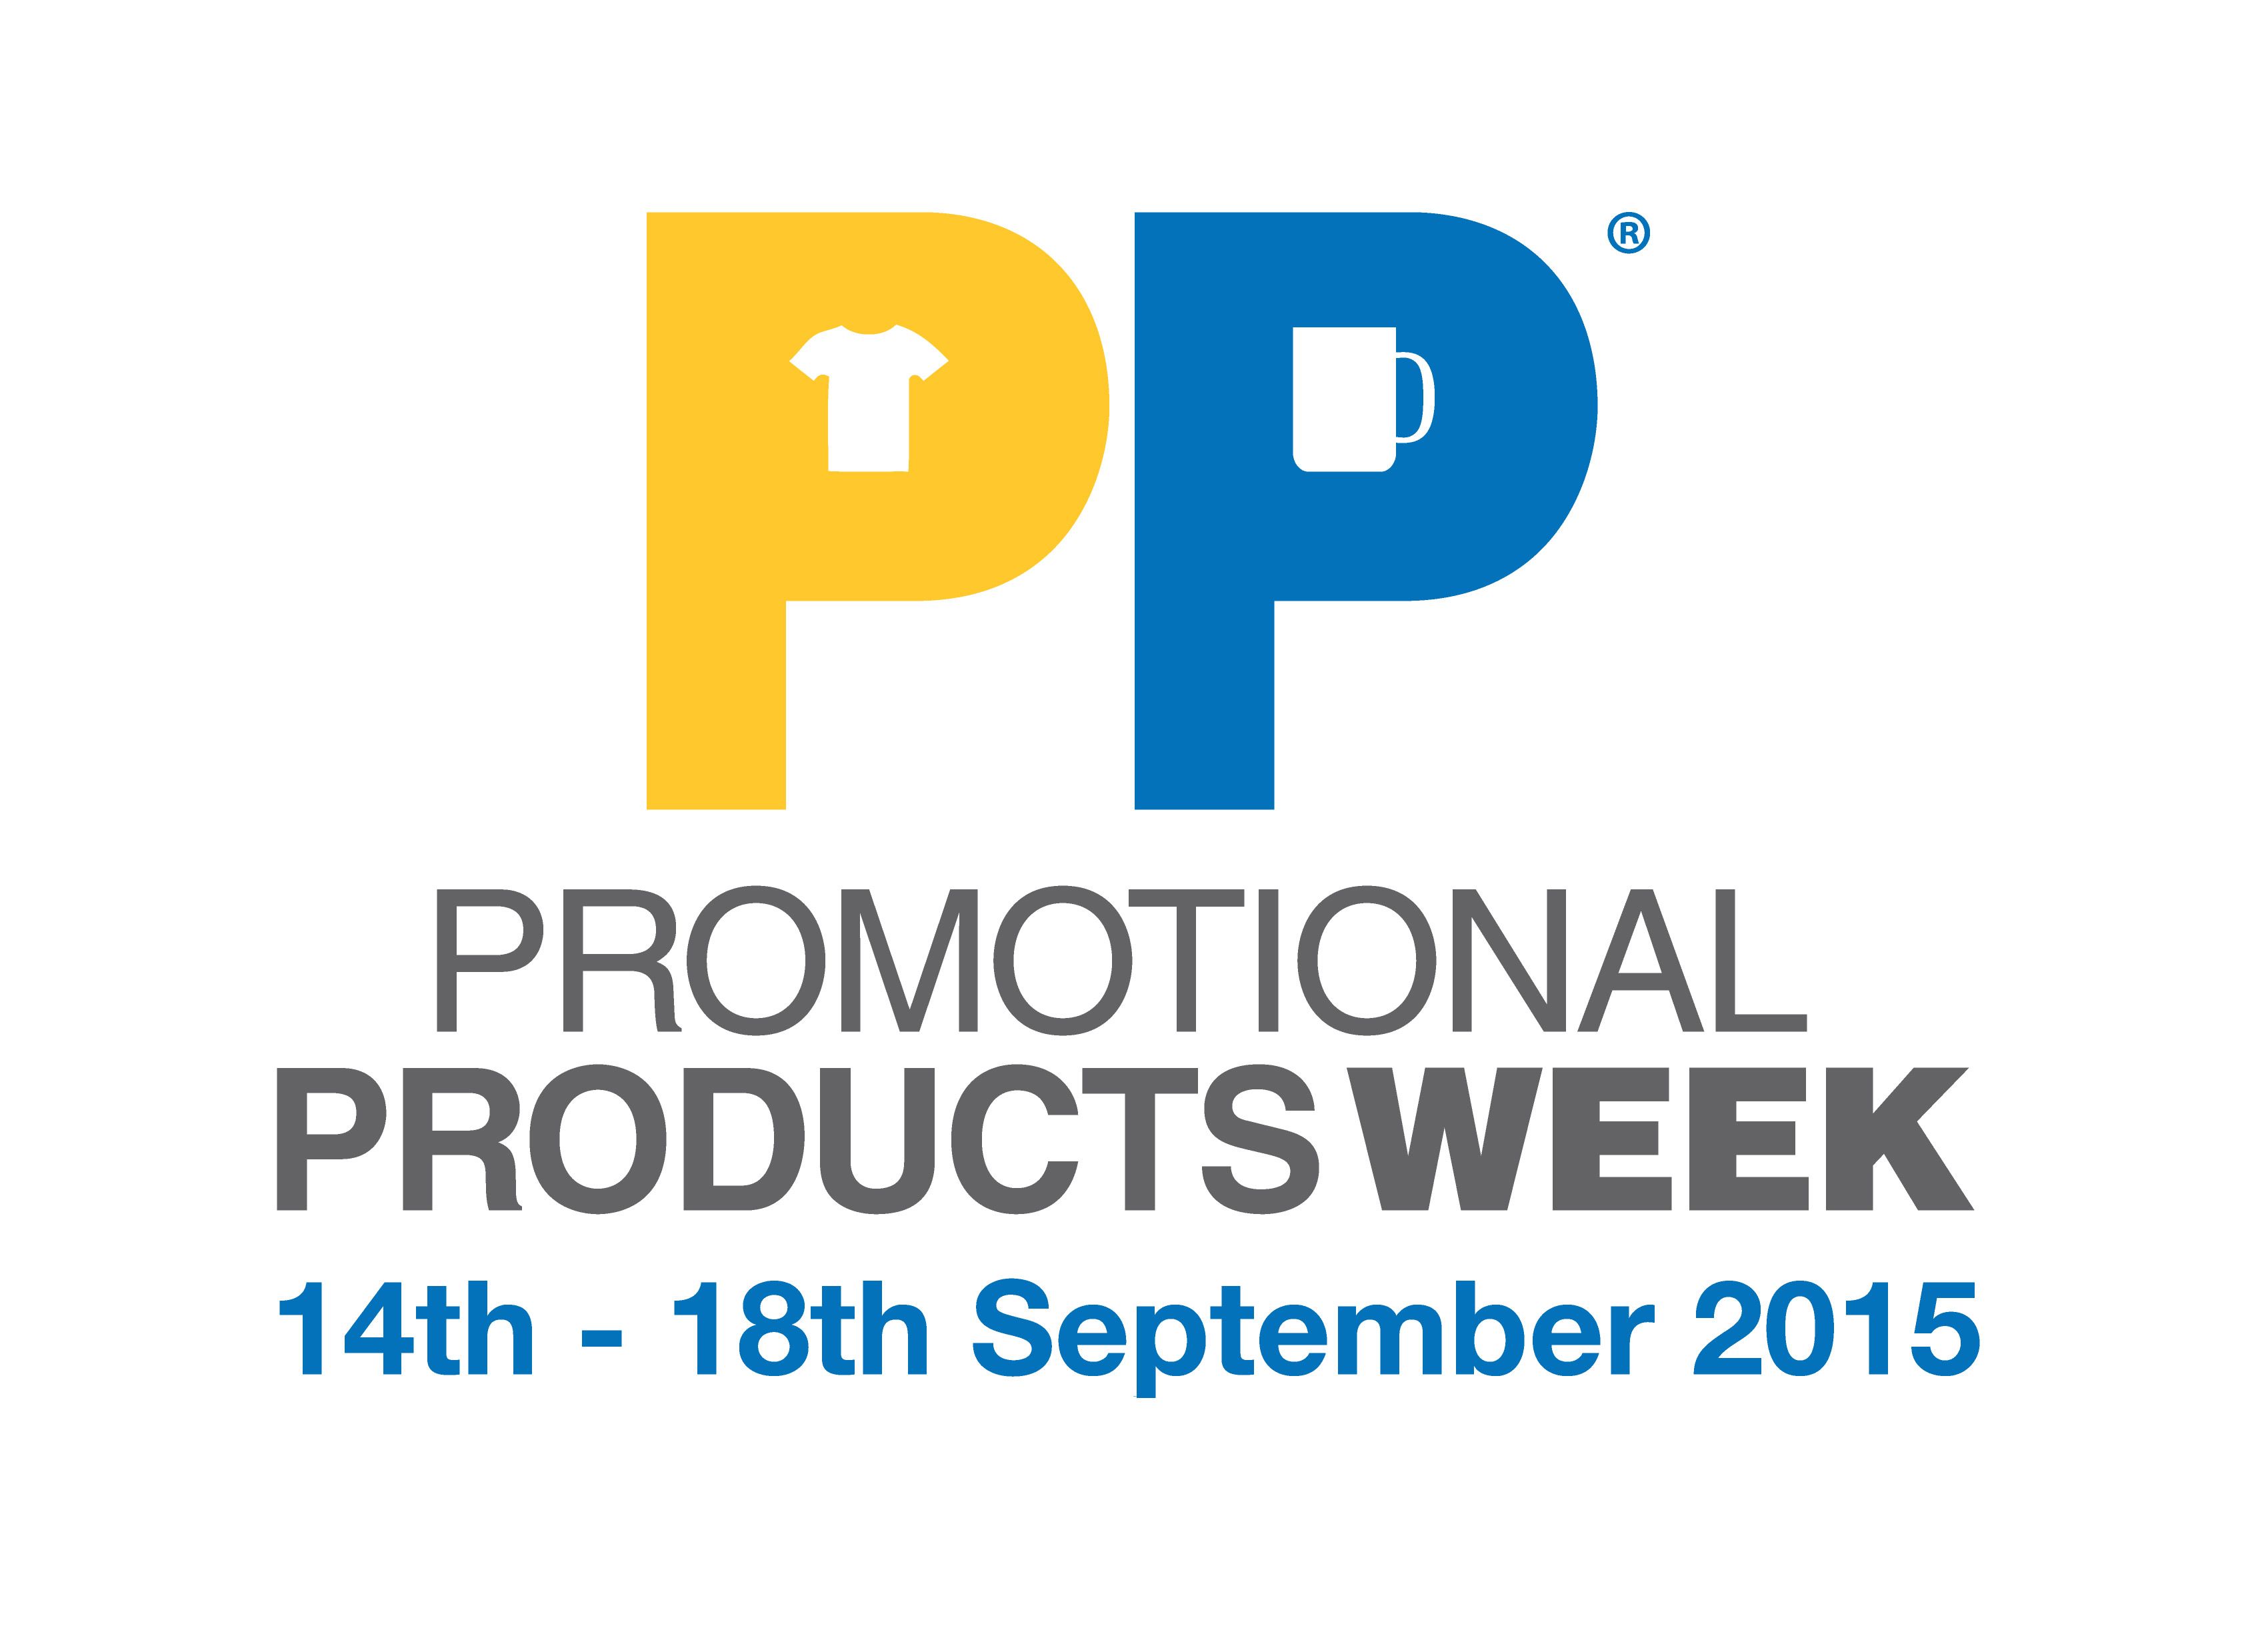 Promotional Products Week 2015